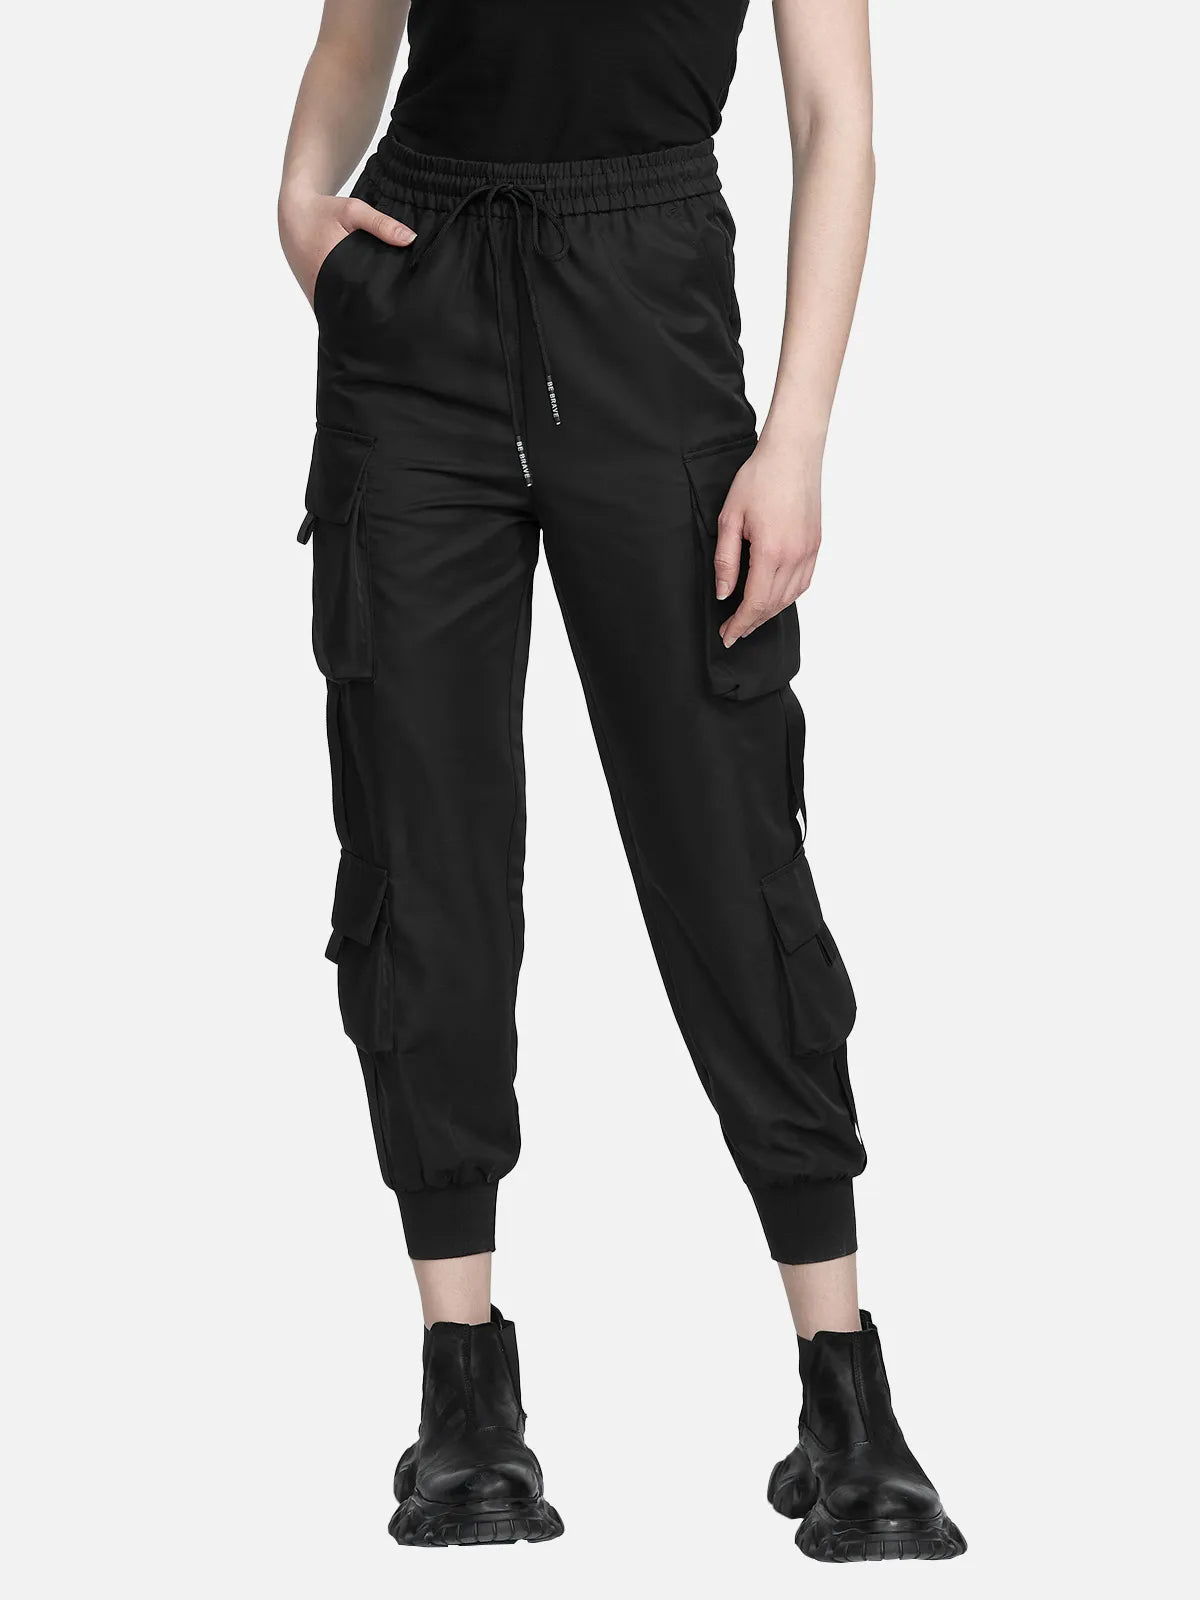 Slim Joggers Workout Pants With Deep Pockets